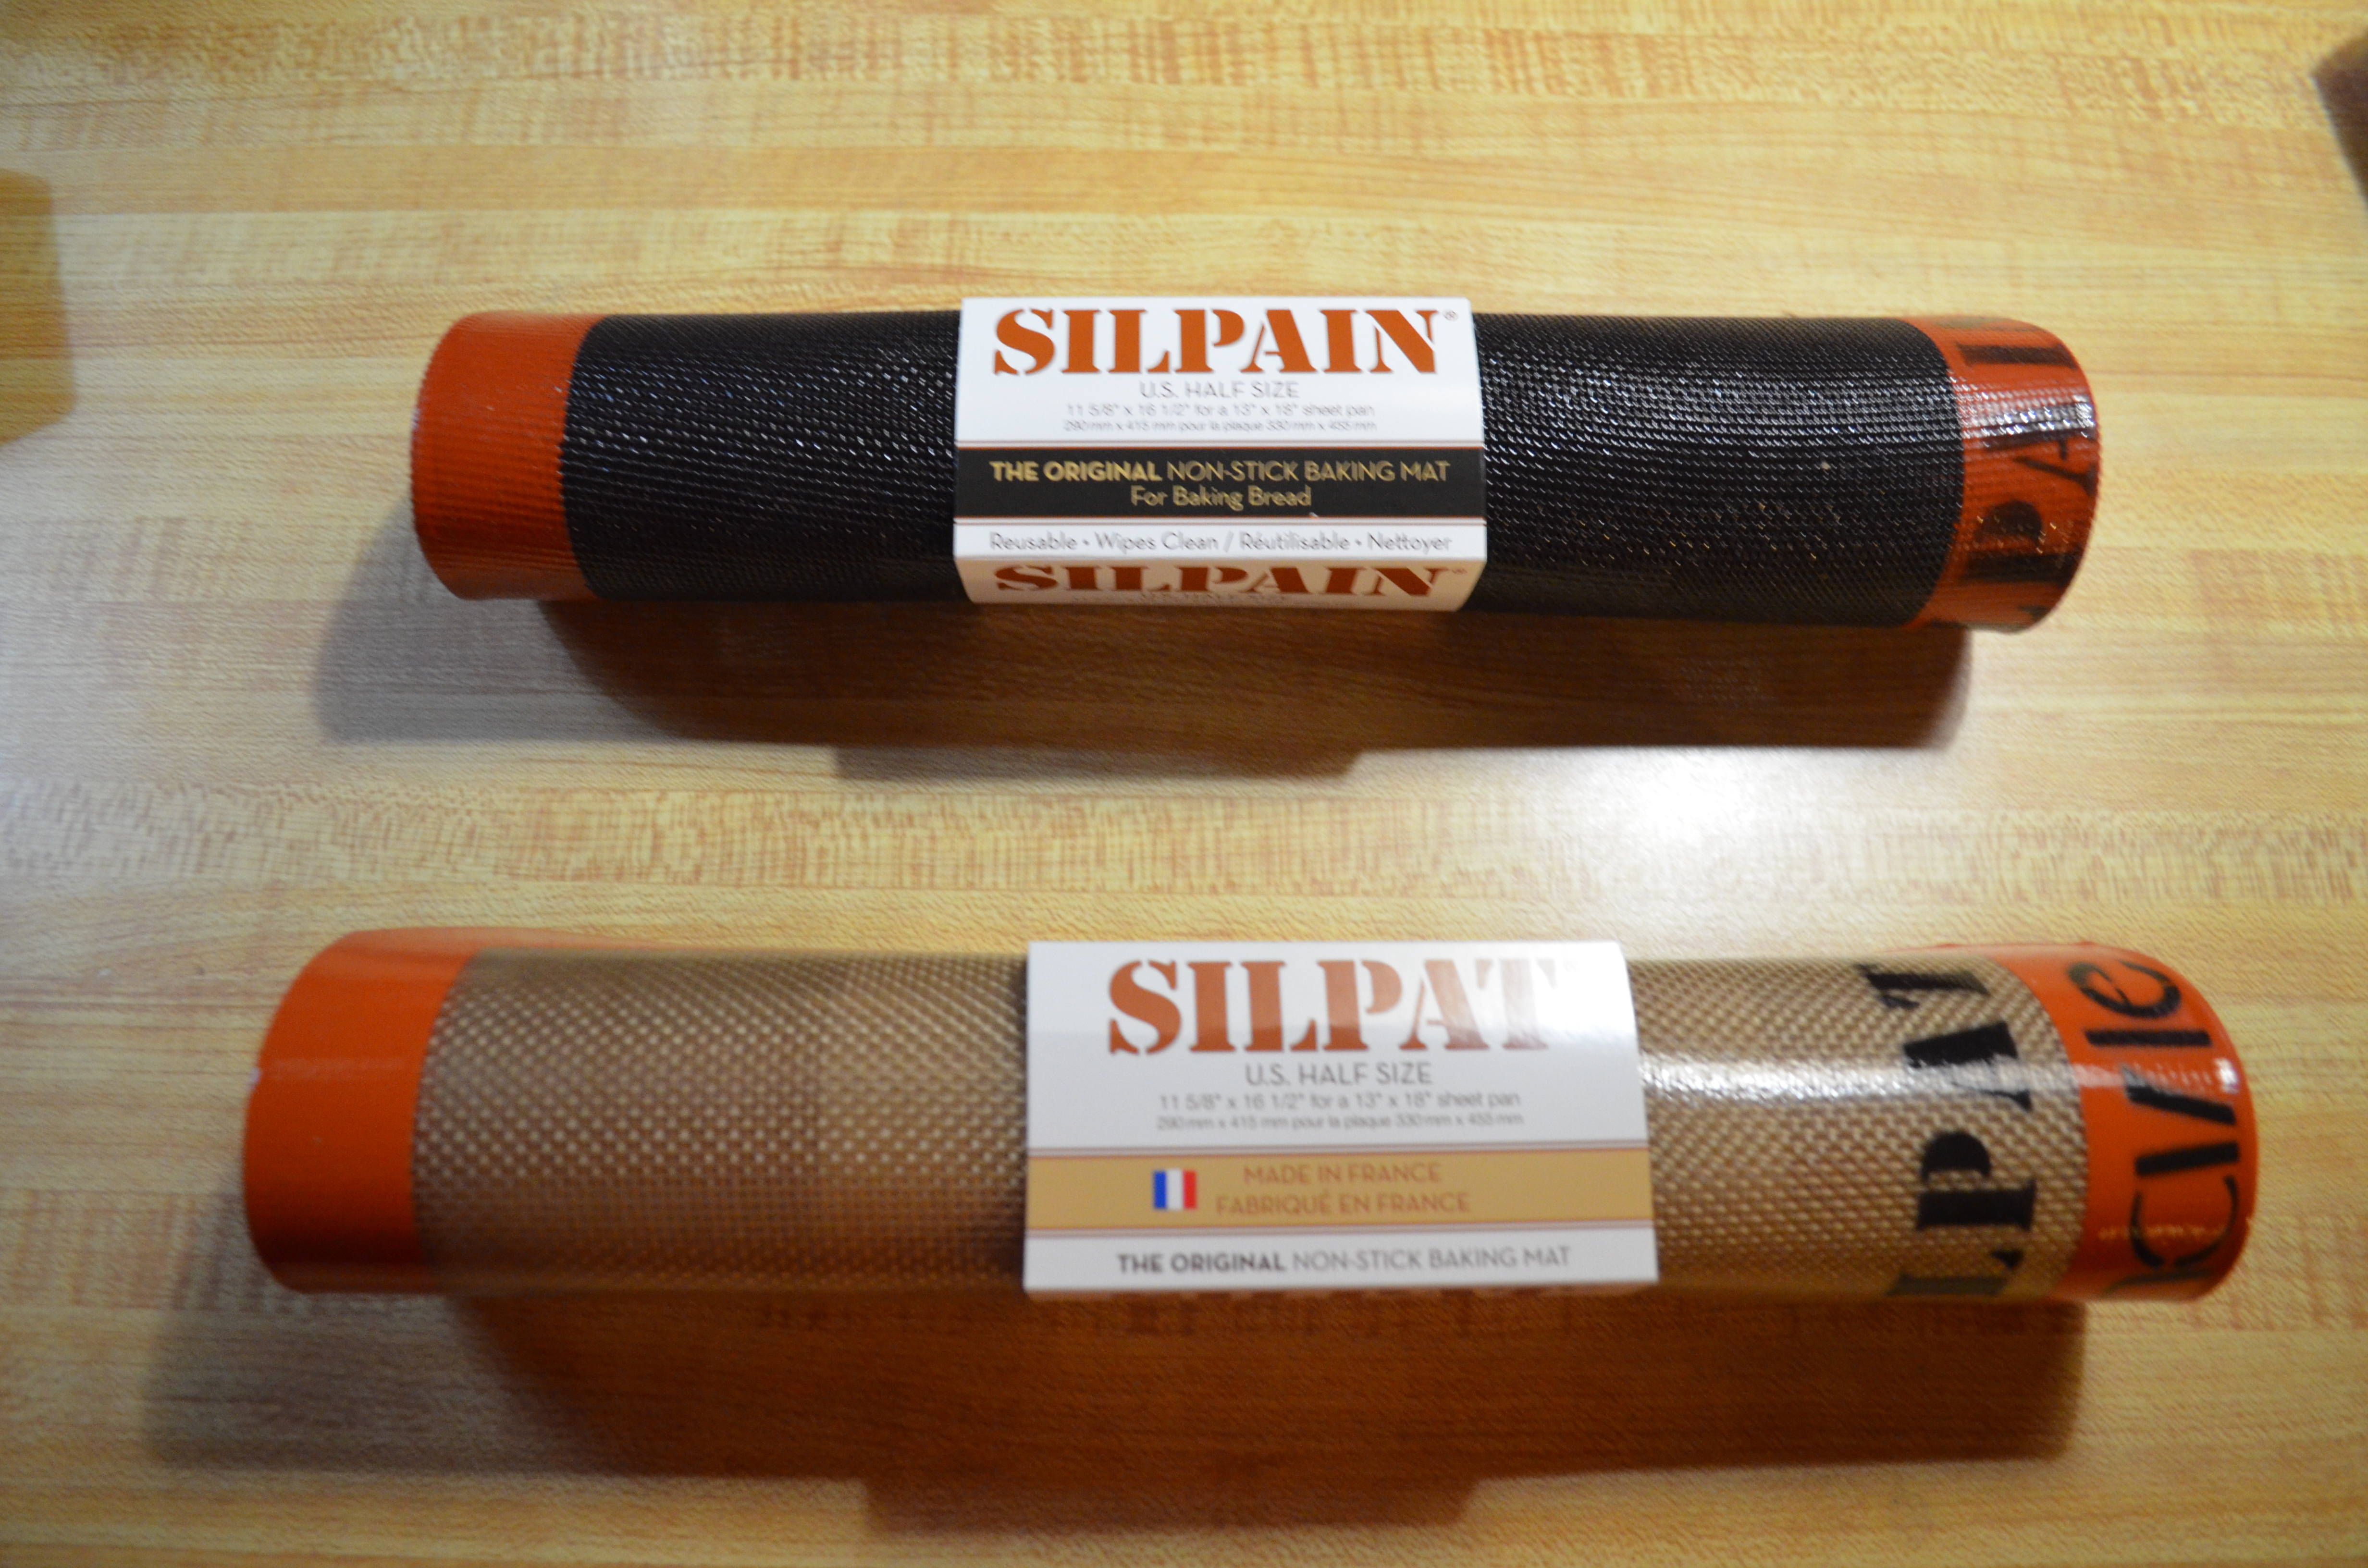 Silpat Non-Stick Baking Mats {Review & Giveaway} Ends 11/29/14